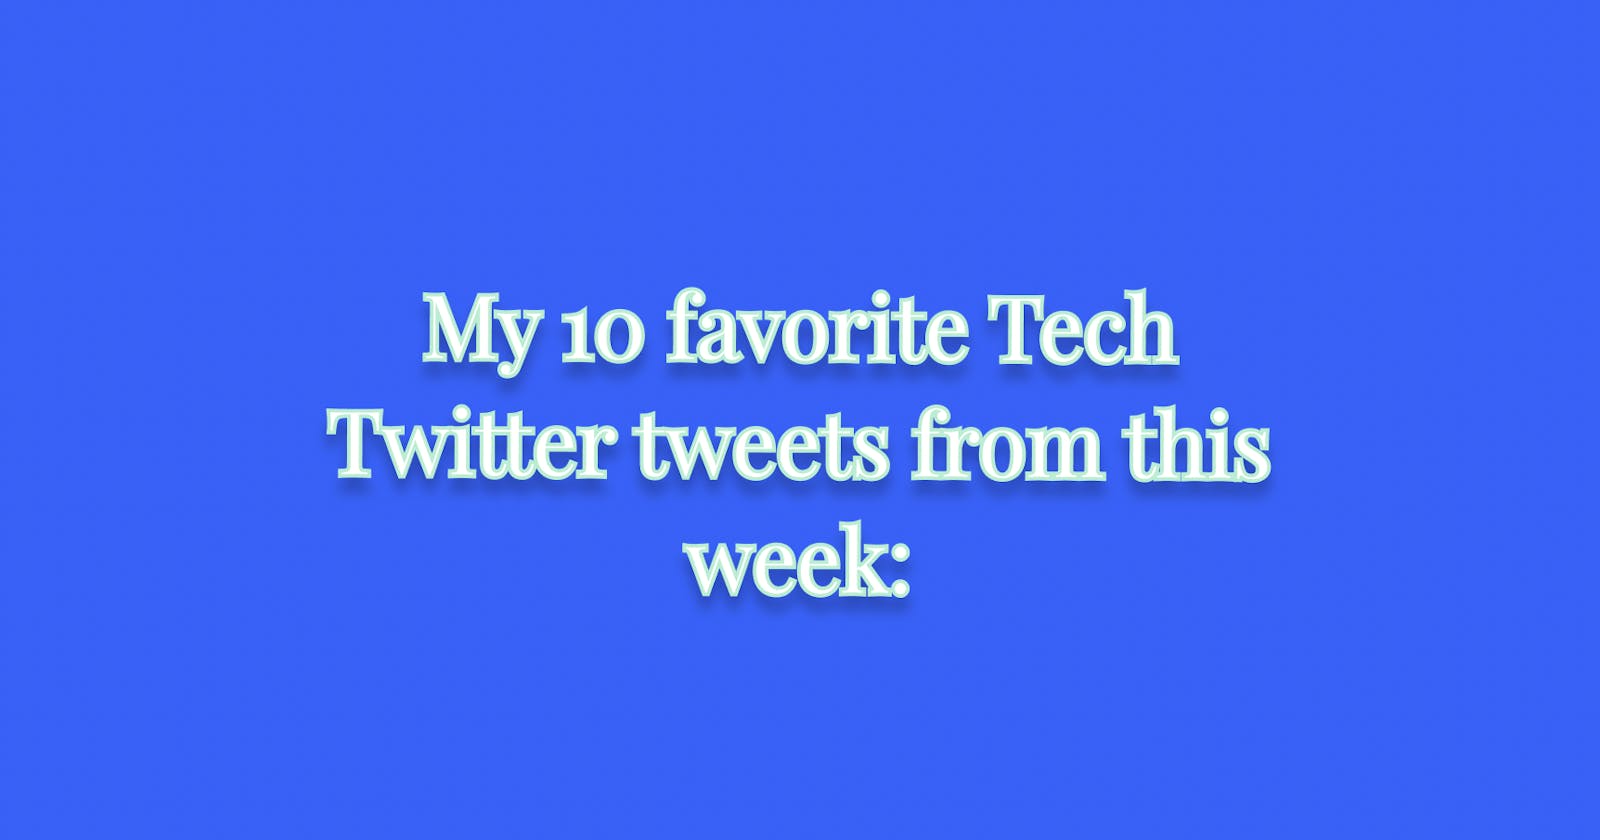 Dates in JavaScript, design tips, Typescript, NFTs, and more

My 10 favorite Tech Twitter tweets from this week: